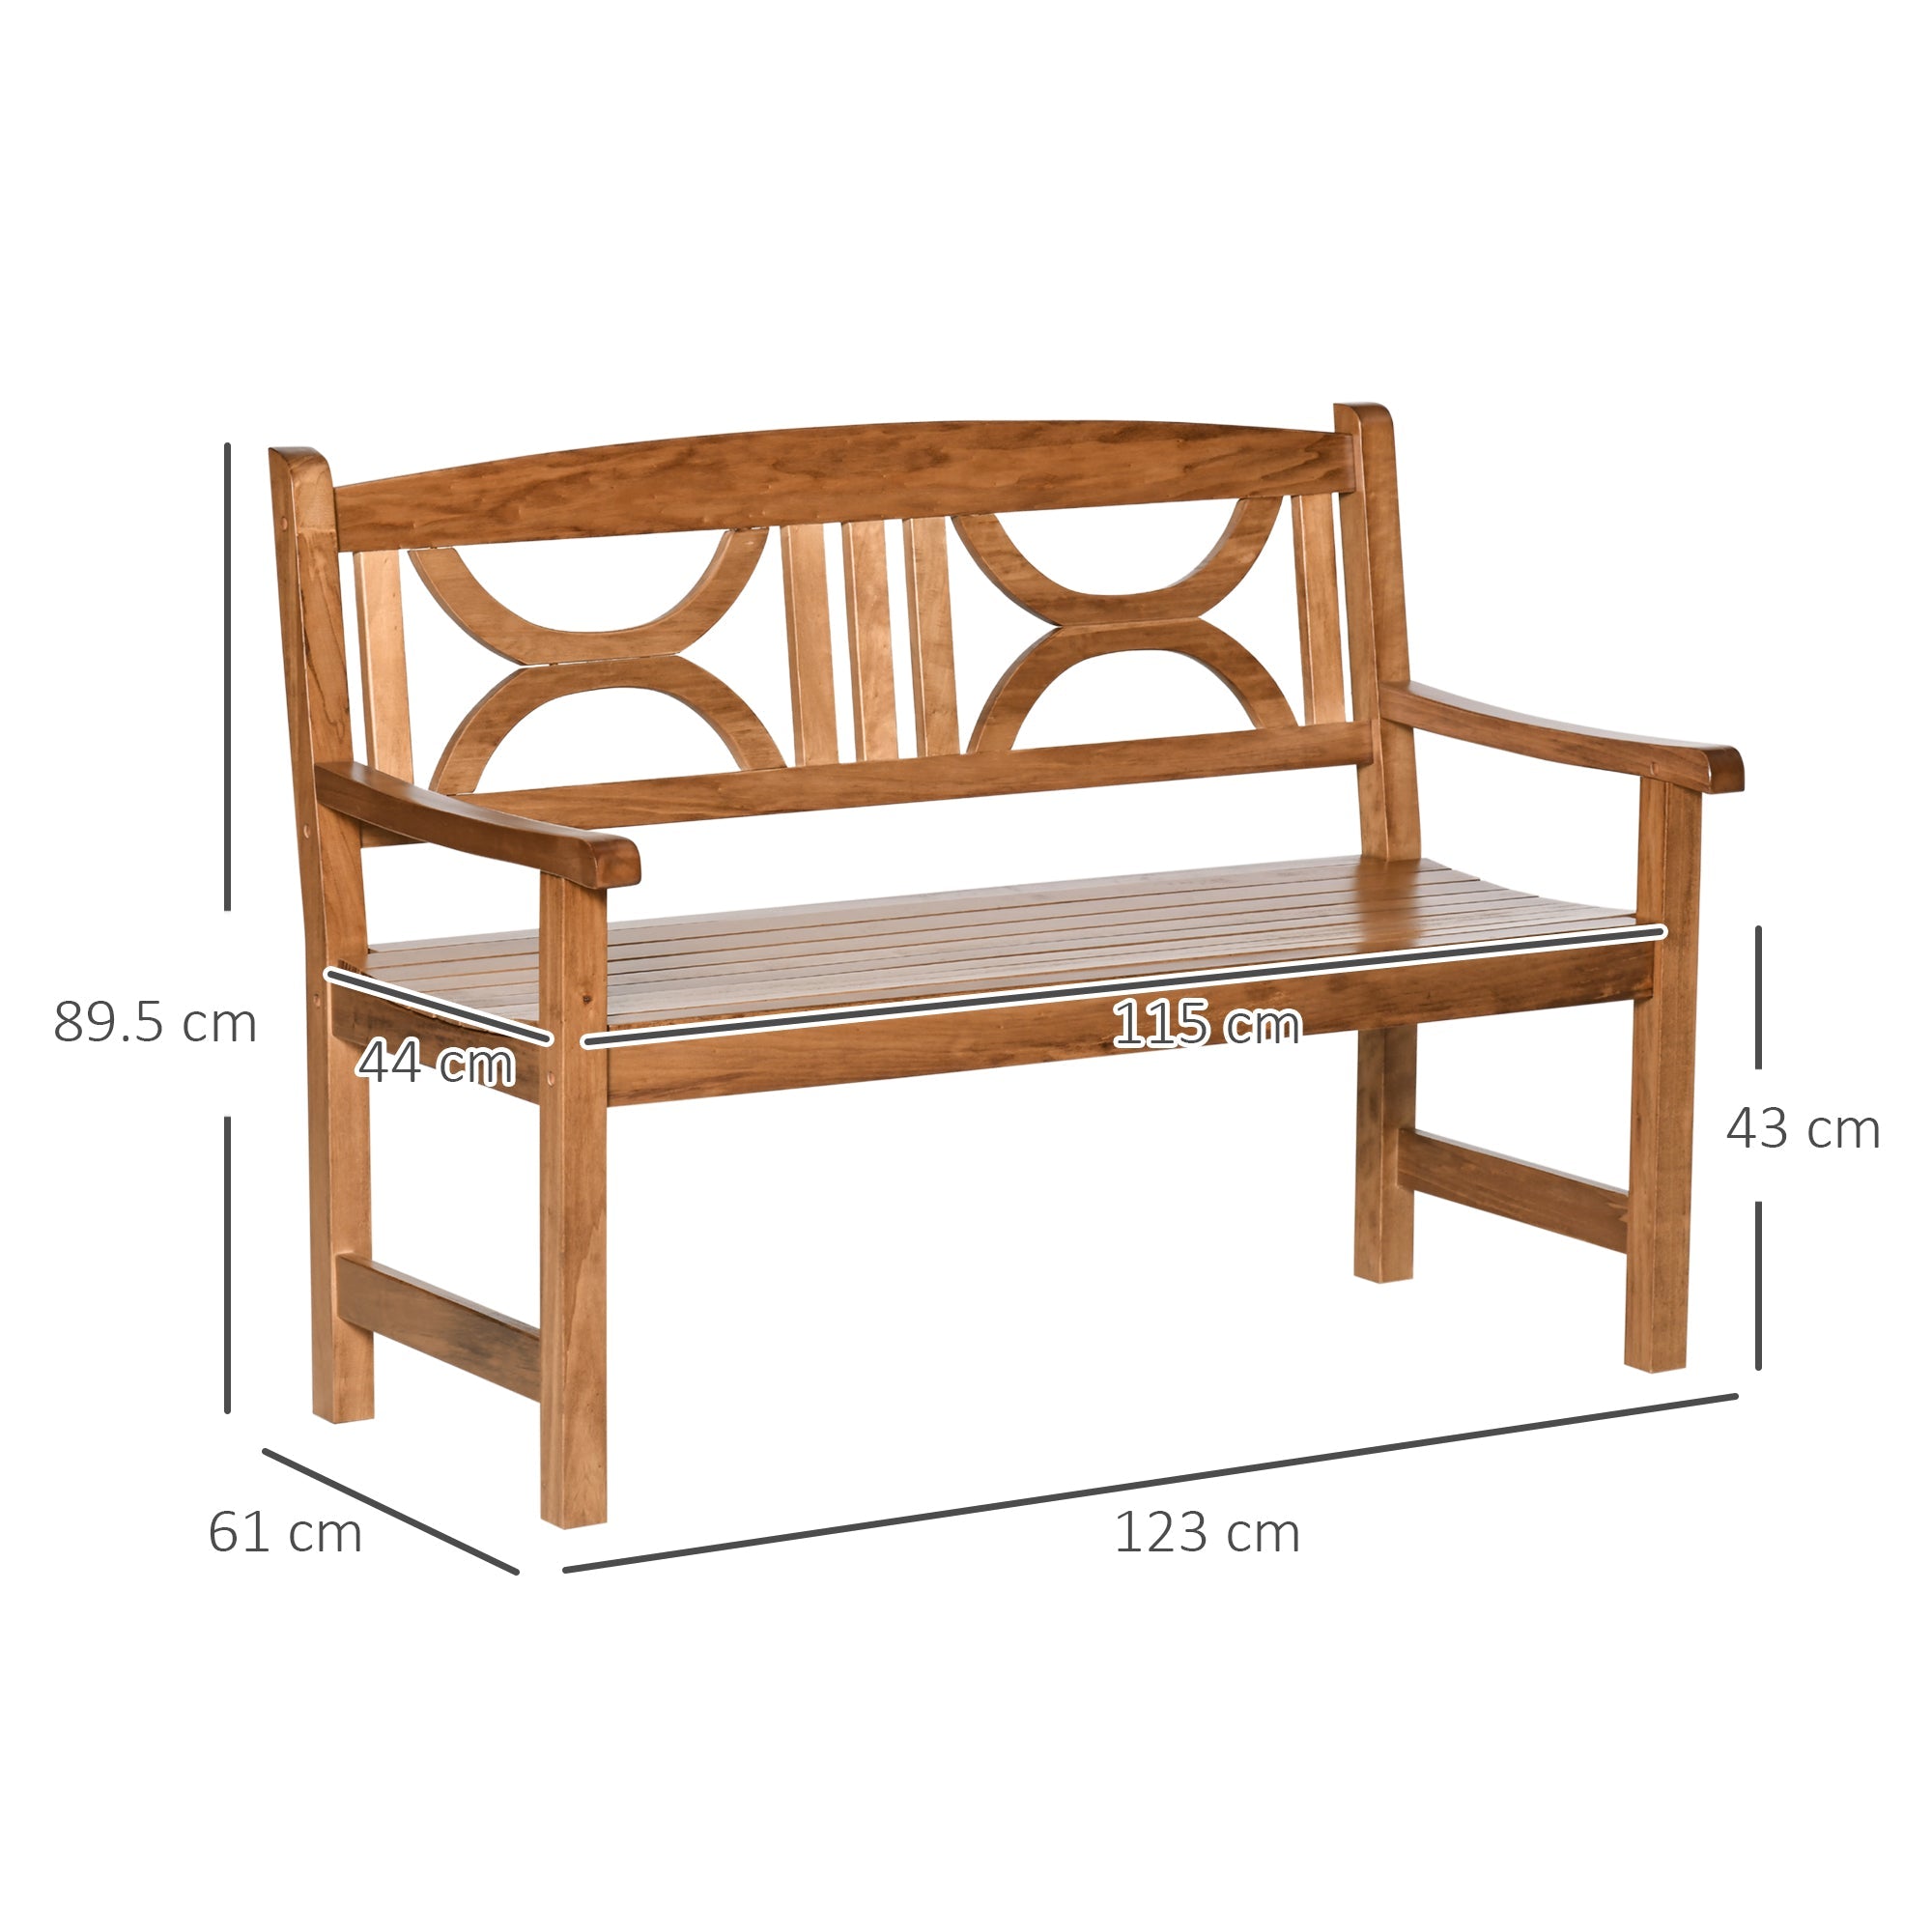 2-Seater Chair, Wooden Garden Bench, Outdoor Patio Loveseat for Yard, Lawn, Porch, Natural-2